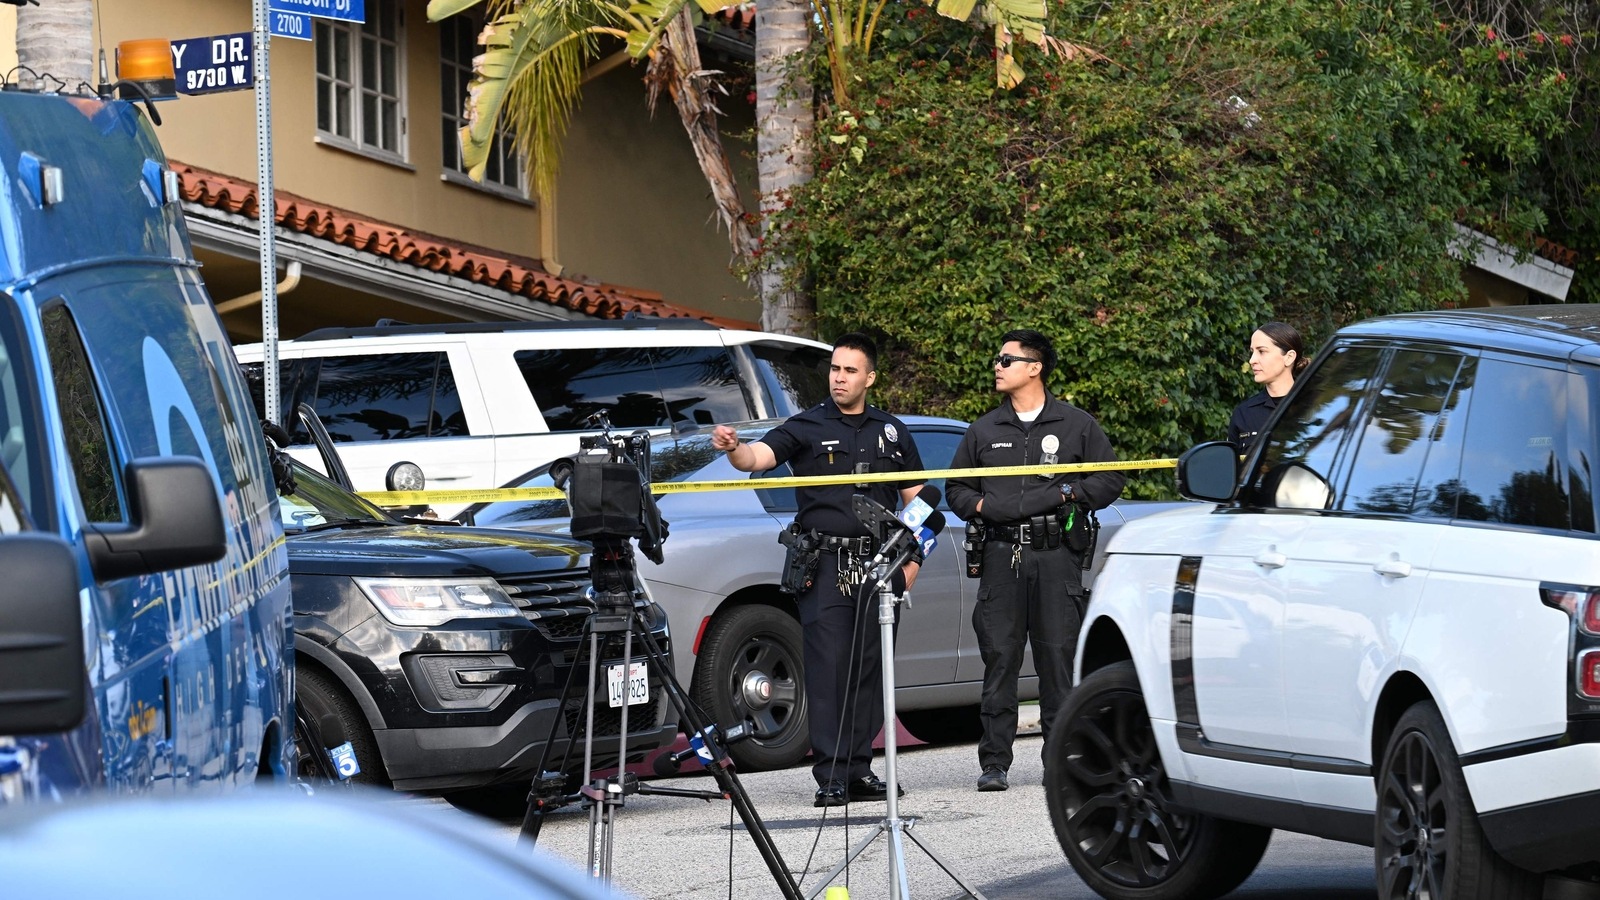 Shooting at party at luxury home near Beverly Hills in Los Angeles leaves 3 dead